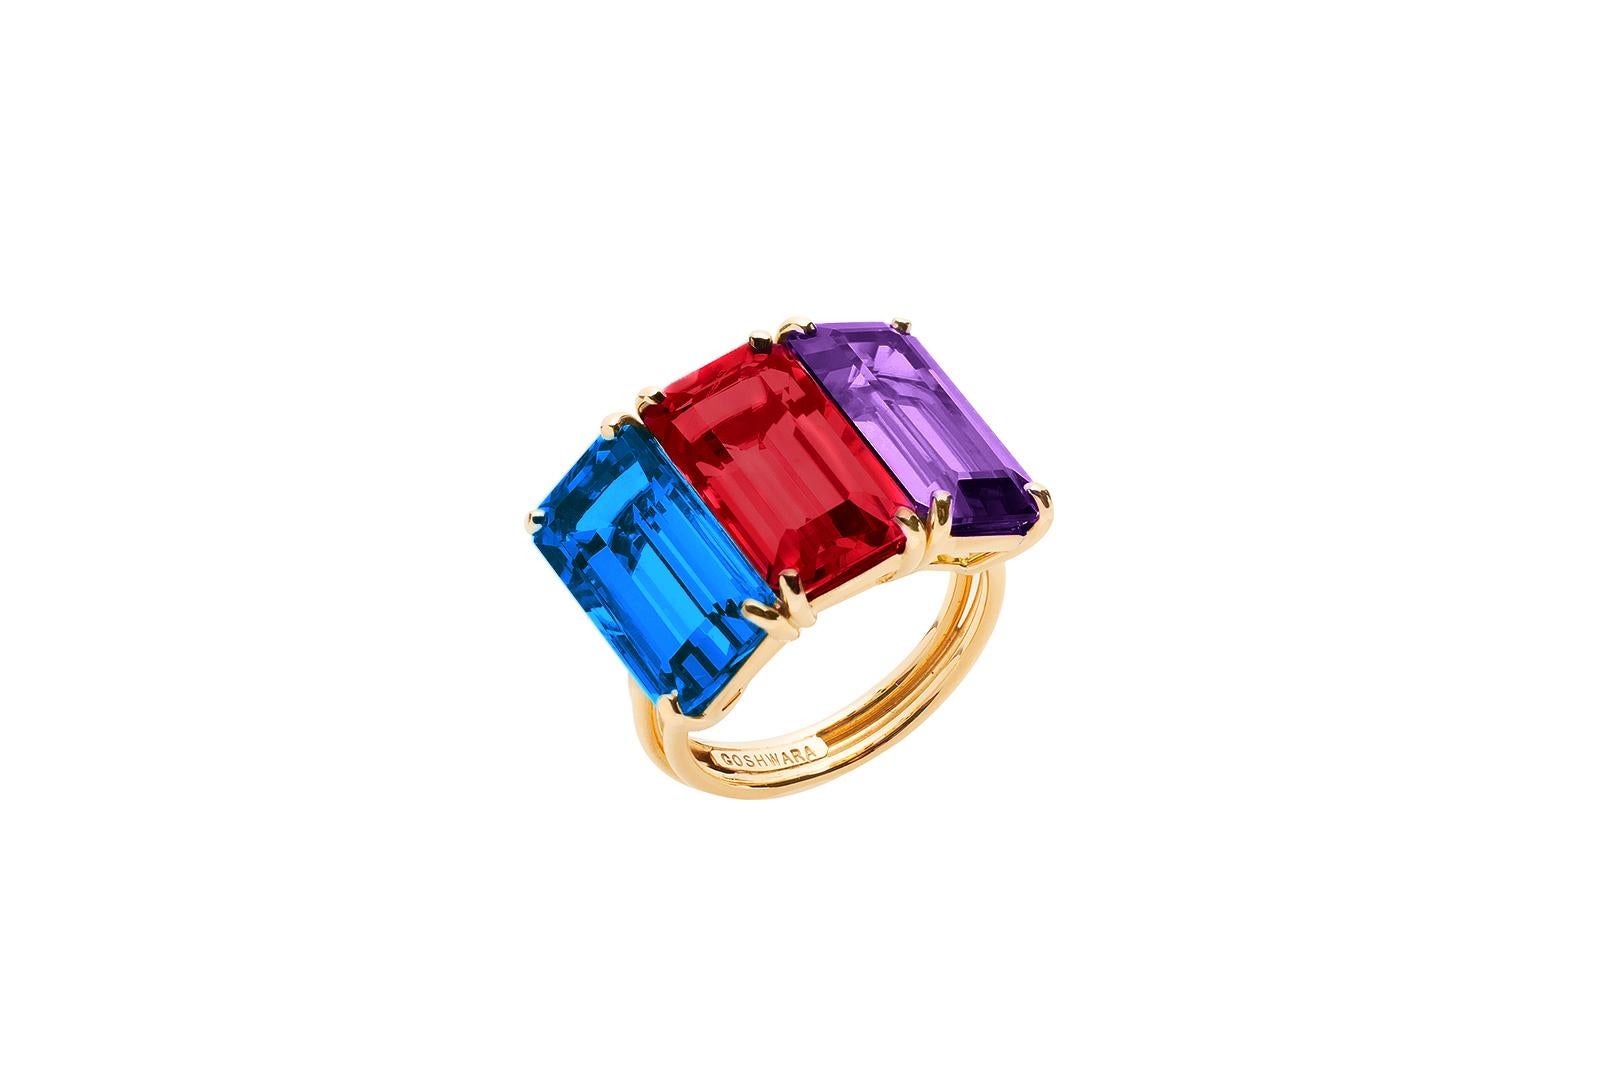 Three Stone Emerald Cut, Amethyst, Garnet and London Blue Topaz Ring in 18K Yellow Gold from 'Gossip' Collection

Stone Size: 13 x 7 mm

Gemstone Approx. Wt: Amethyst- 3.55 Carats 
                                       Garnet- 5.40 Carats 
        